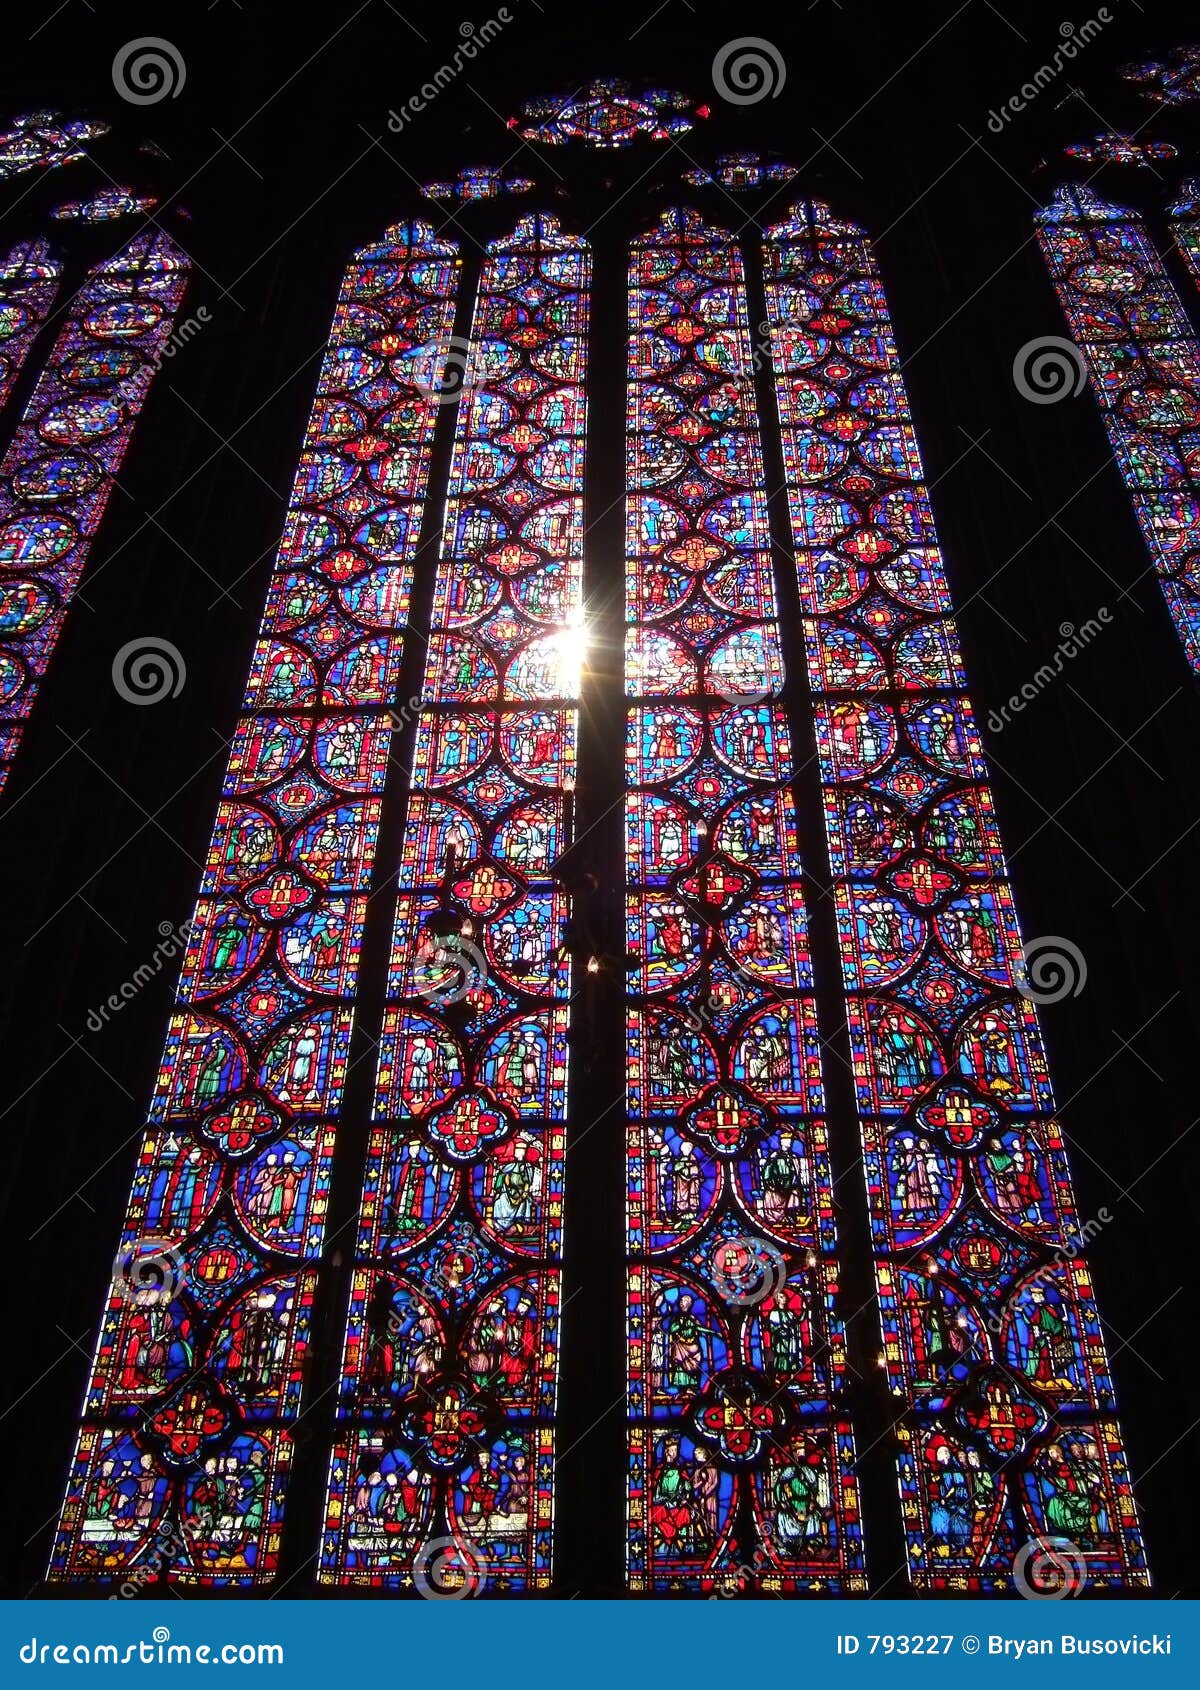 sainte-chapelle stained glass